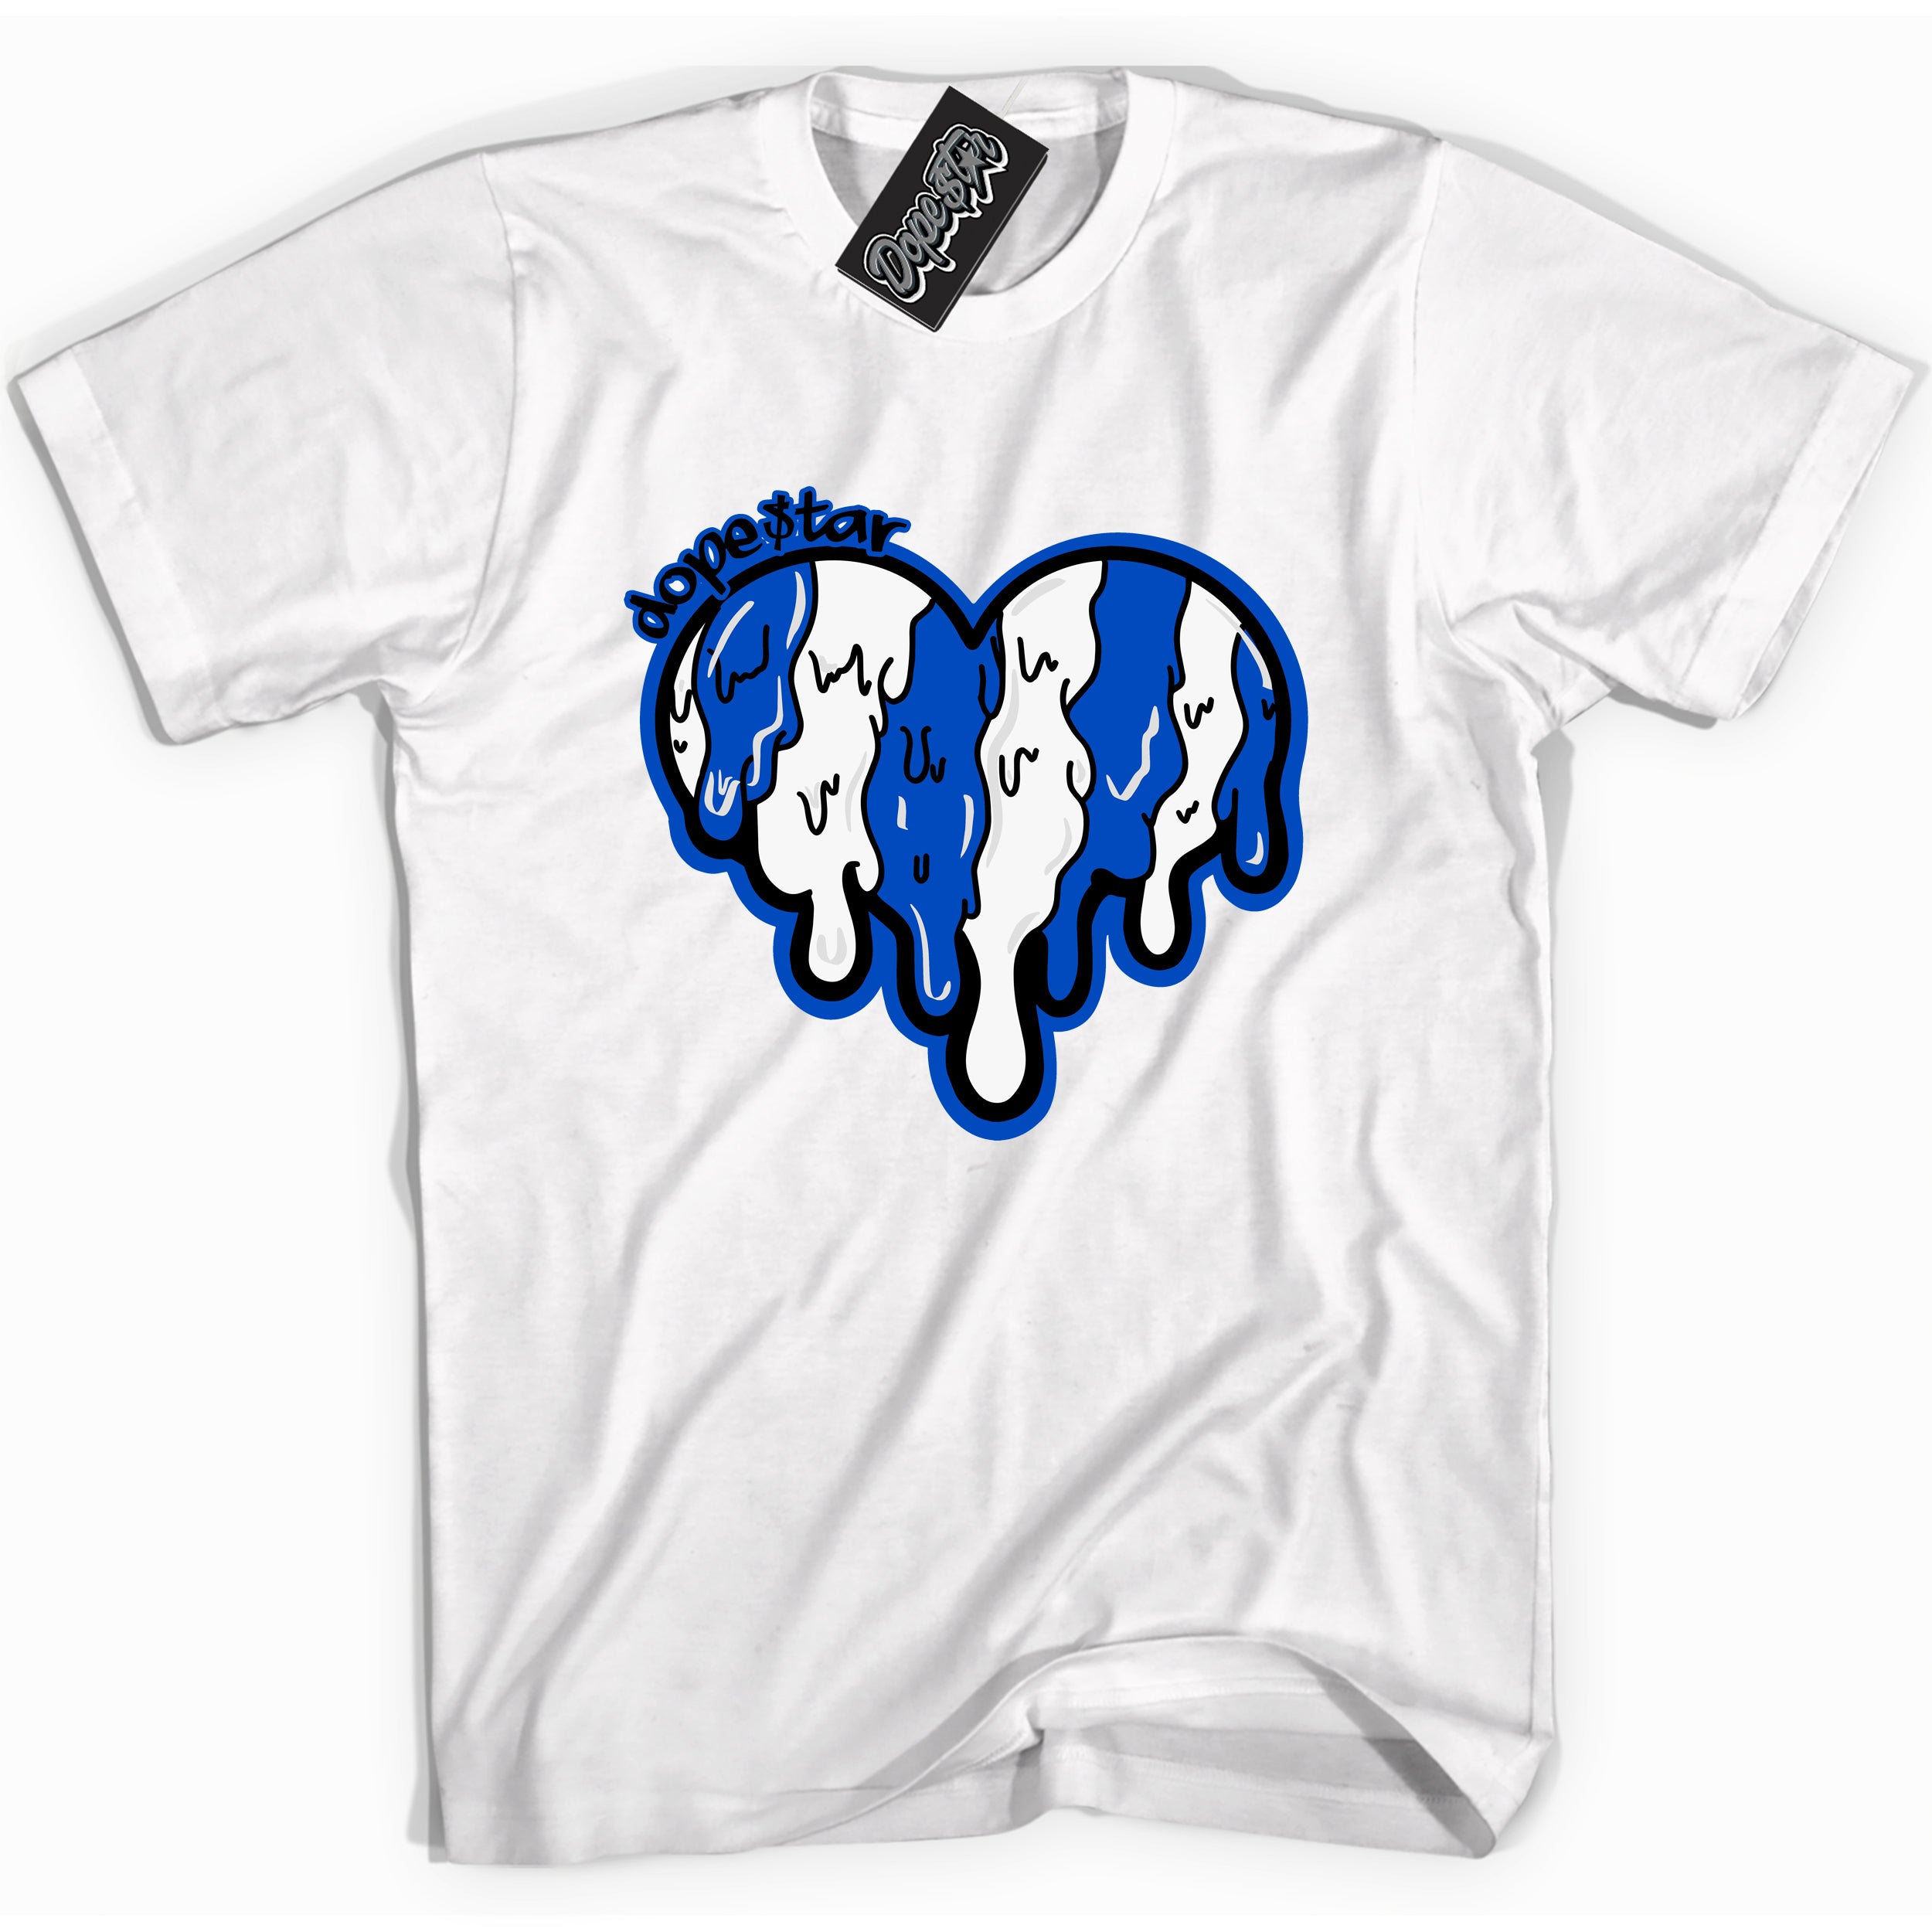 Cool White graphic tee with Melting Heart print, that perfectly matches OG Royal Reimagined 1s sneakers 